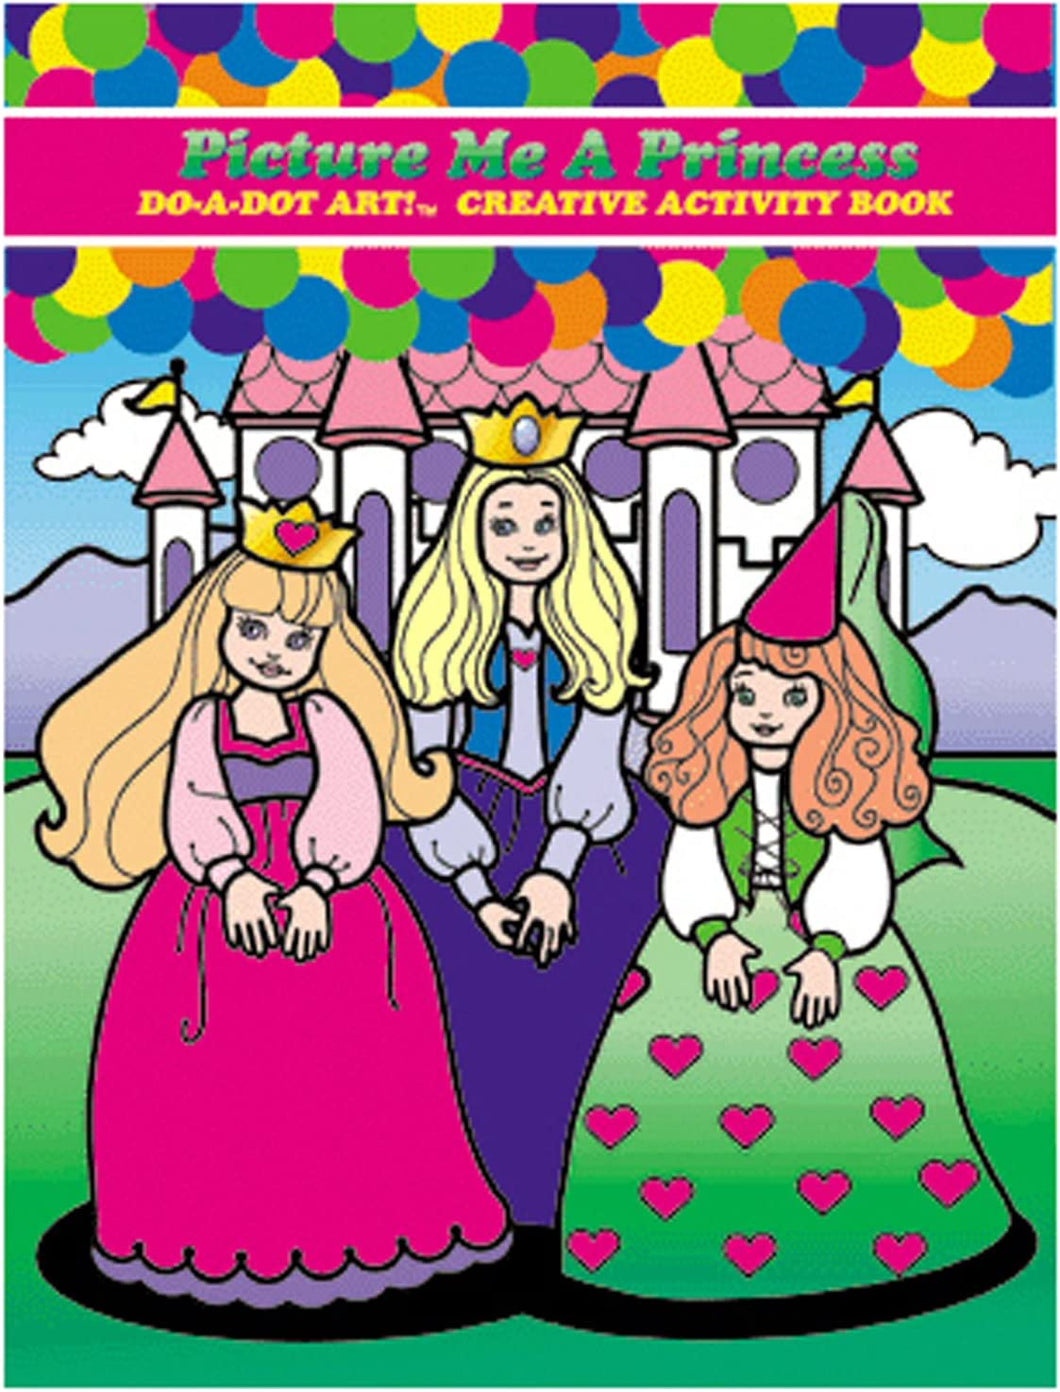 Dot A Dot Art Activity Book for Girls and Toddlers Picture Me a Princess